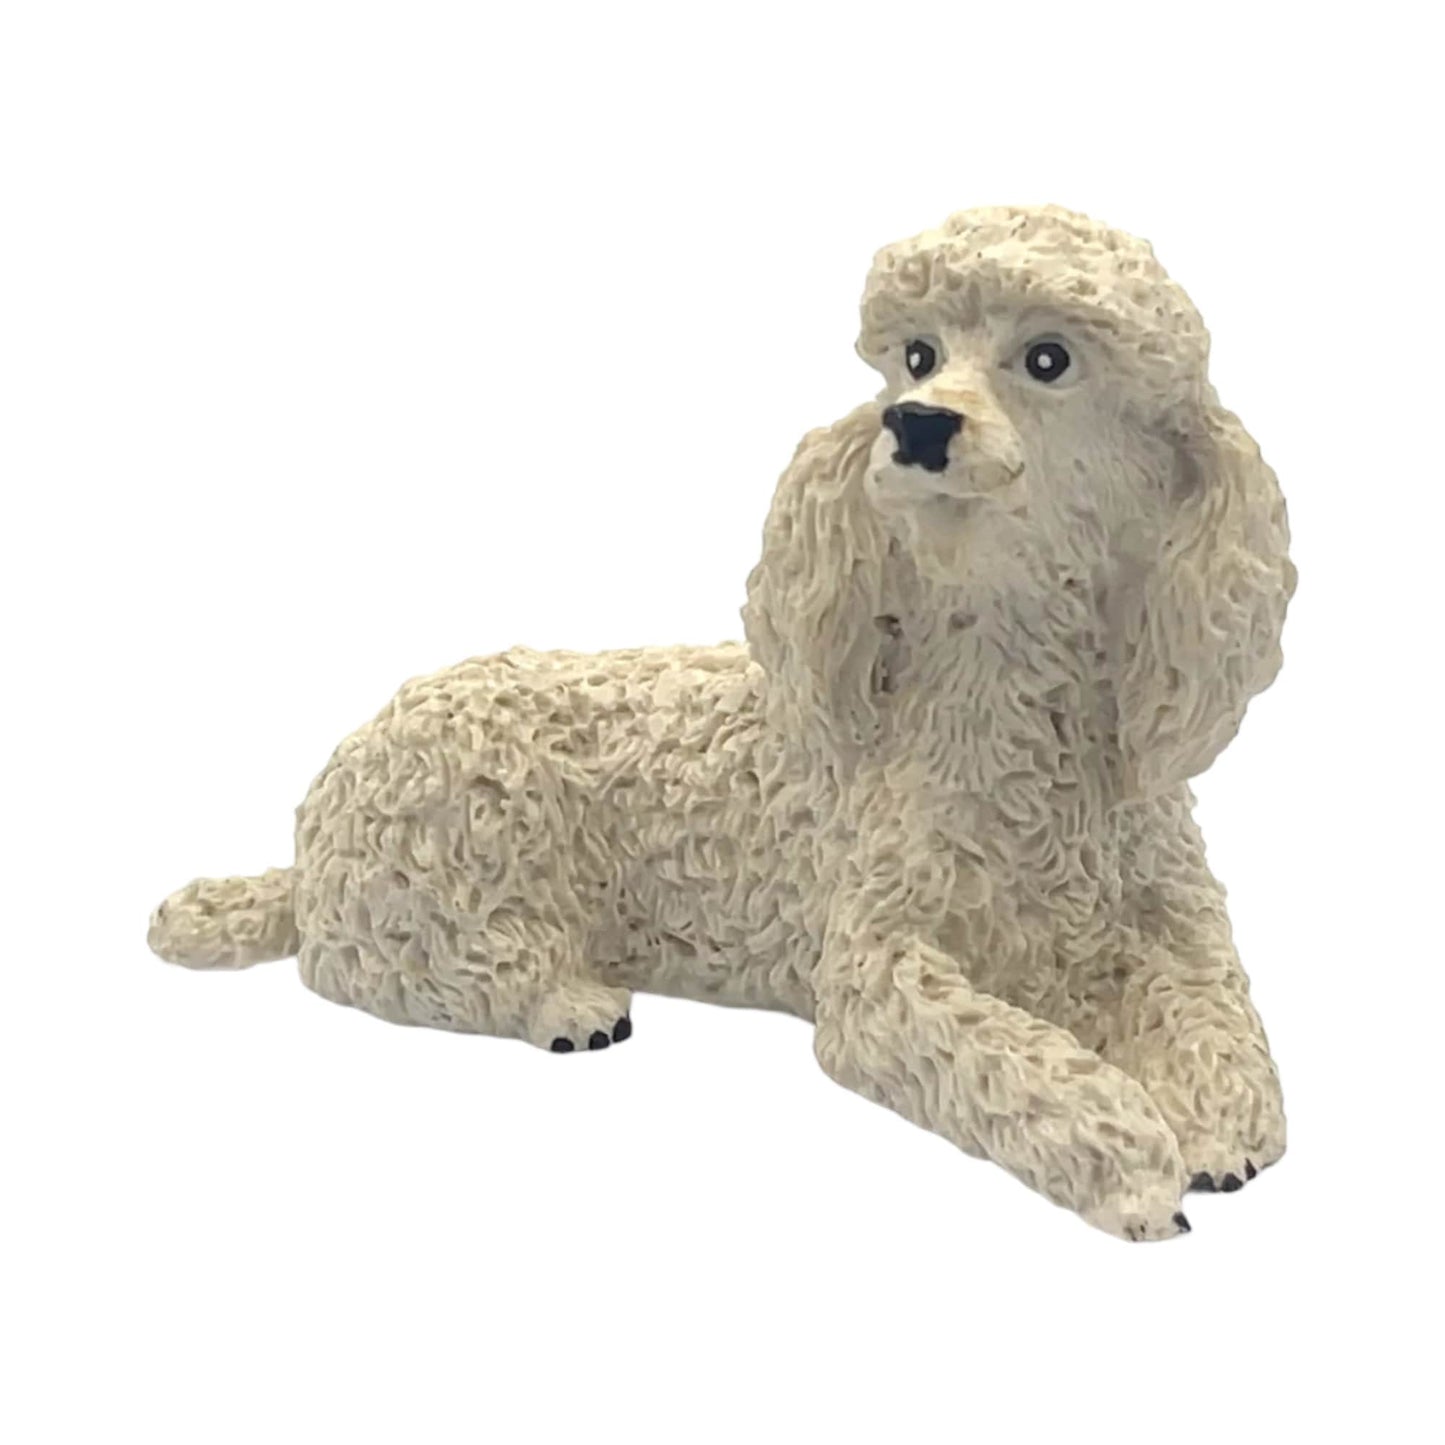 Sandicast  - Poodle  - Laying Down - 3.5" x 5"